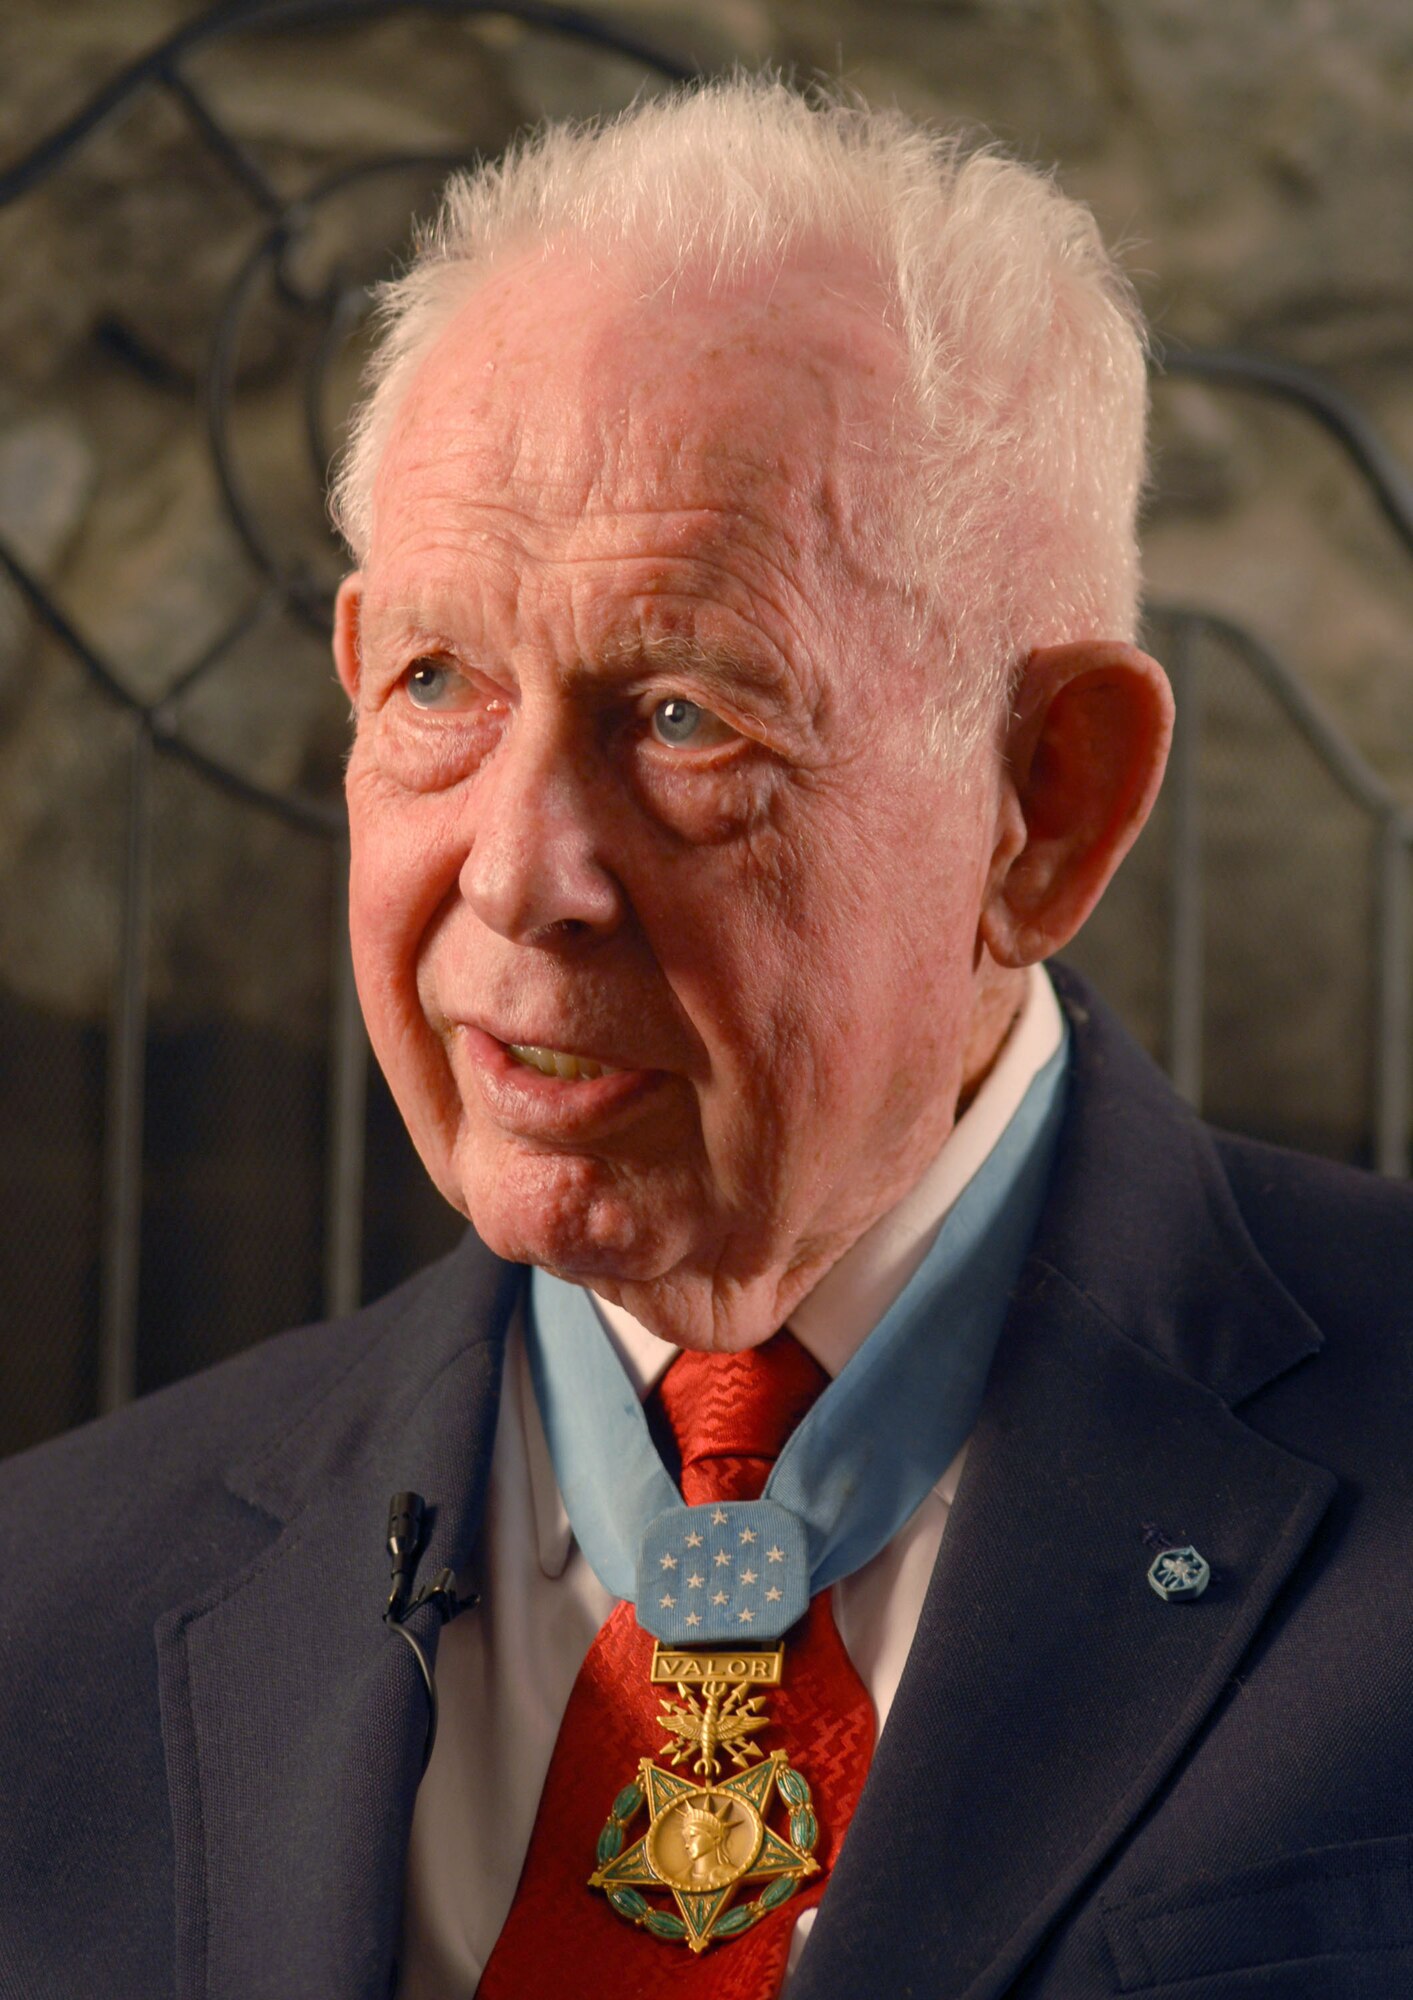 KUNSAN AIR BASE, South Korea - Colonel Bernard F. Fisher (retired), the first living U.S. Air Force recipient of the Medal of Honor, answers questions during an interview here Feb 26.  Colonel Fisher was the first U.S. Air Force member to receive the Medal of Honor for heroism during the Vietnam War. (U.S. Air Force photo/Staff Sgt. Darcie Ibidapo)